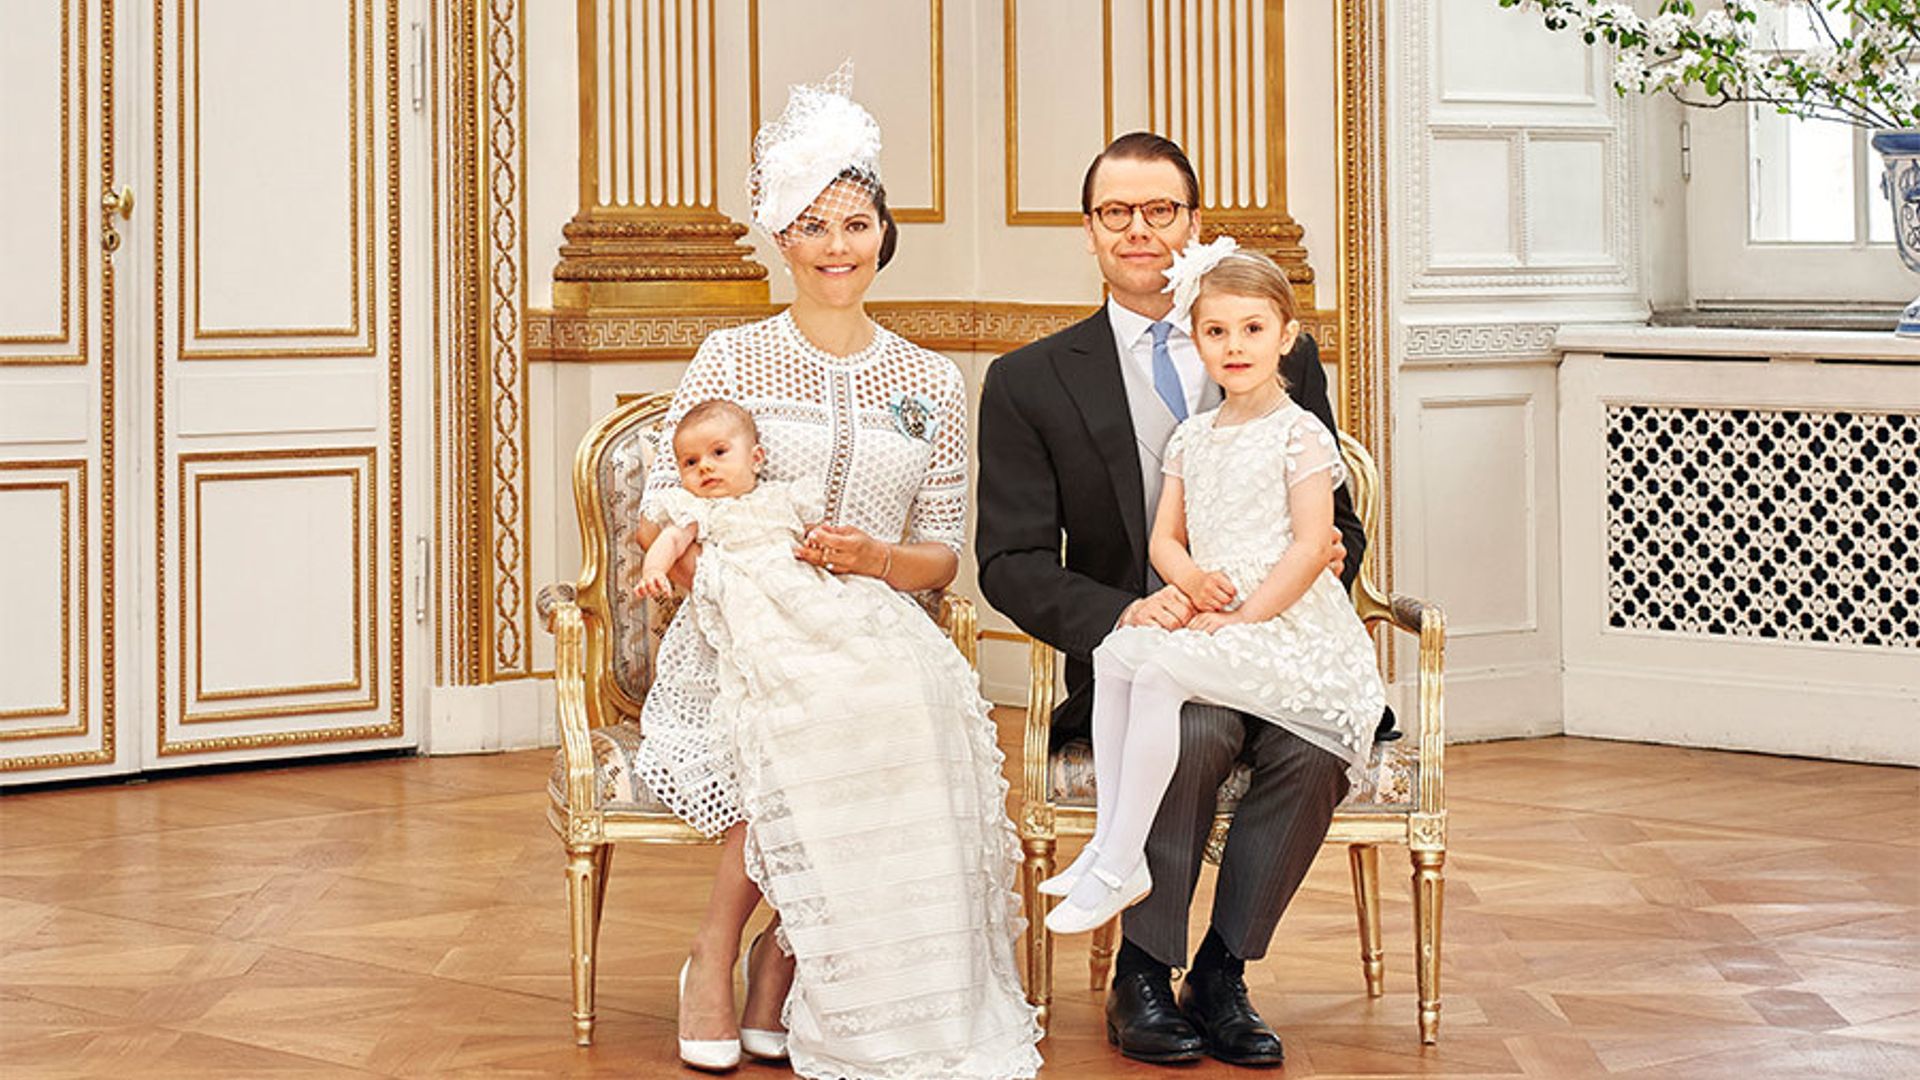 Swedish royal family release official photos from Prince Oscar's christening